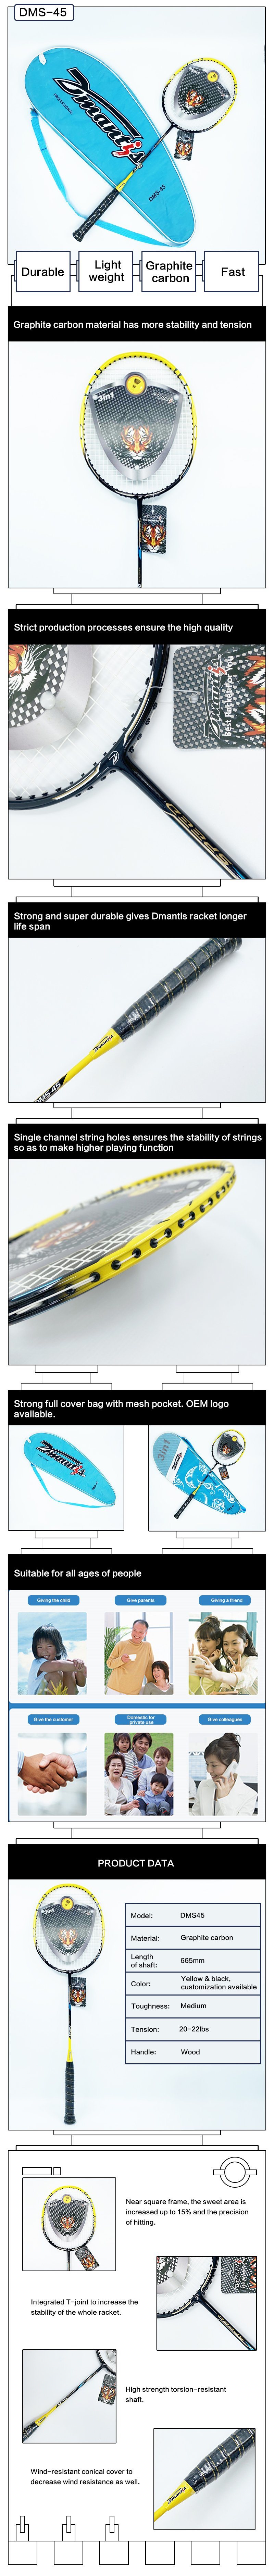 Carbon Badminton Racket for Training Durable Stable Top Brands Cheap with Carry Bag for Outdoor and Indoor Activity